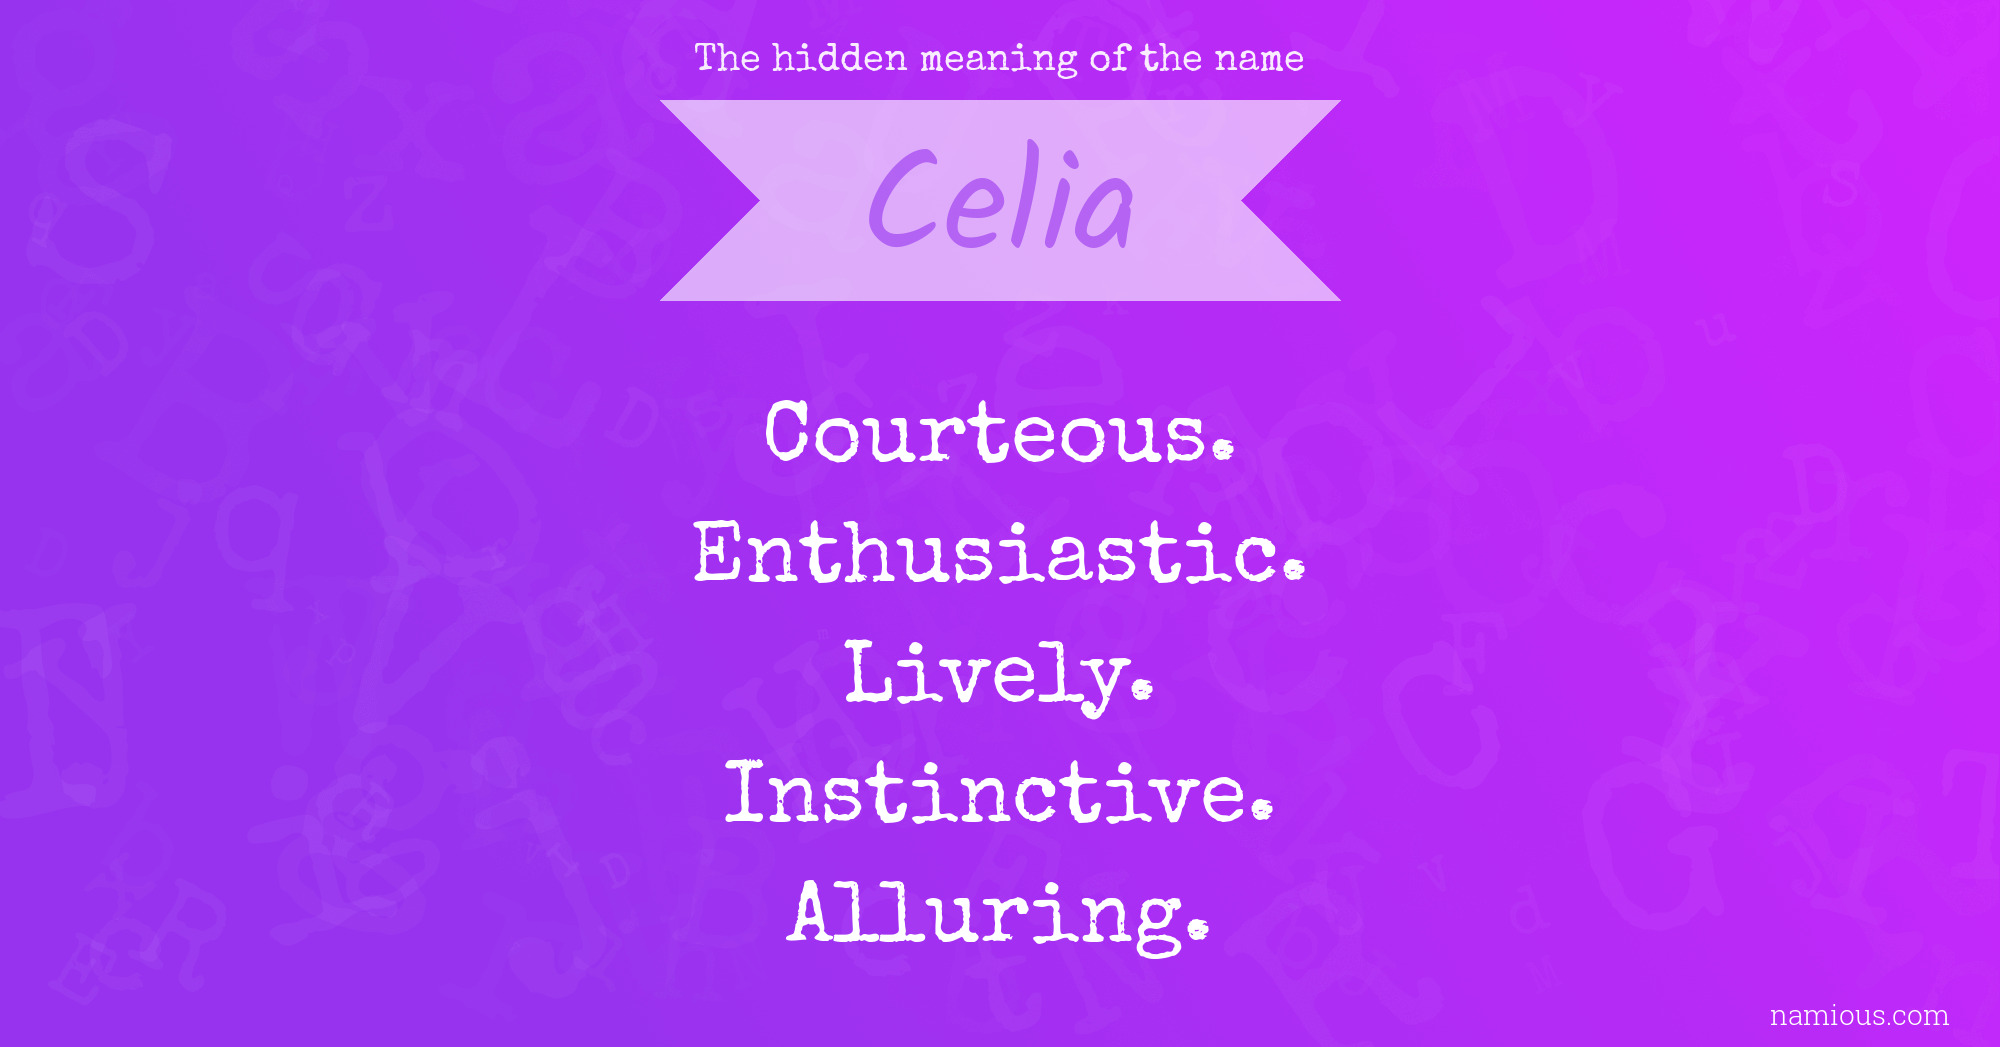 The hidden meaning of the name Celia